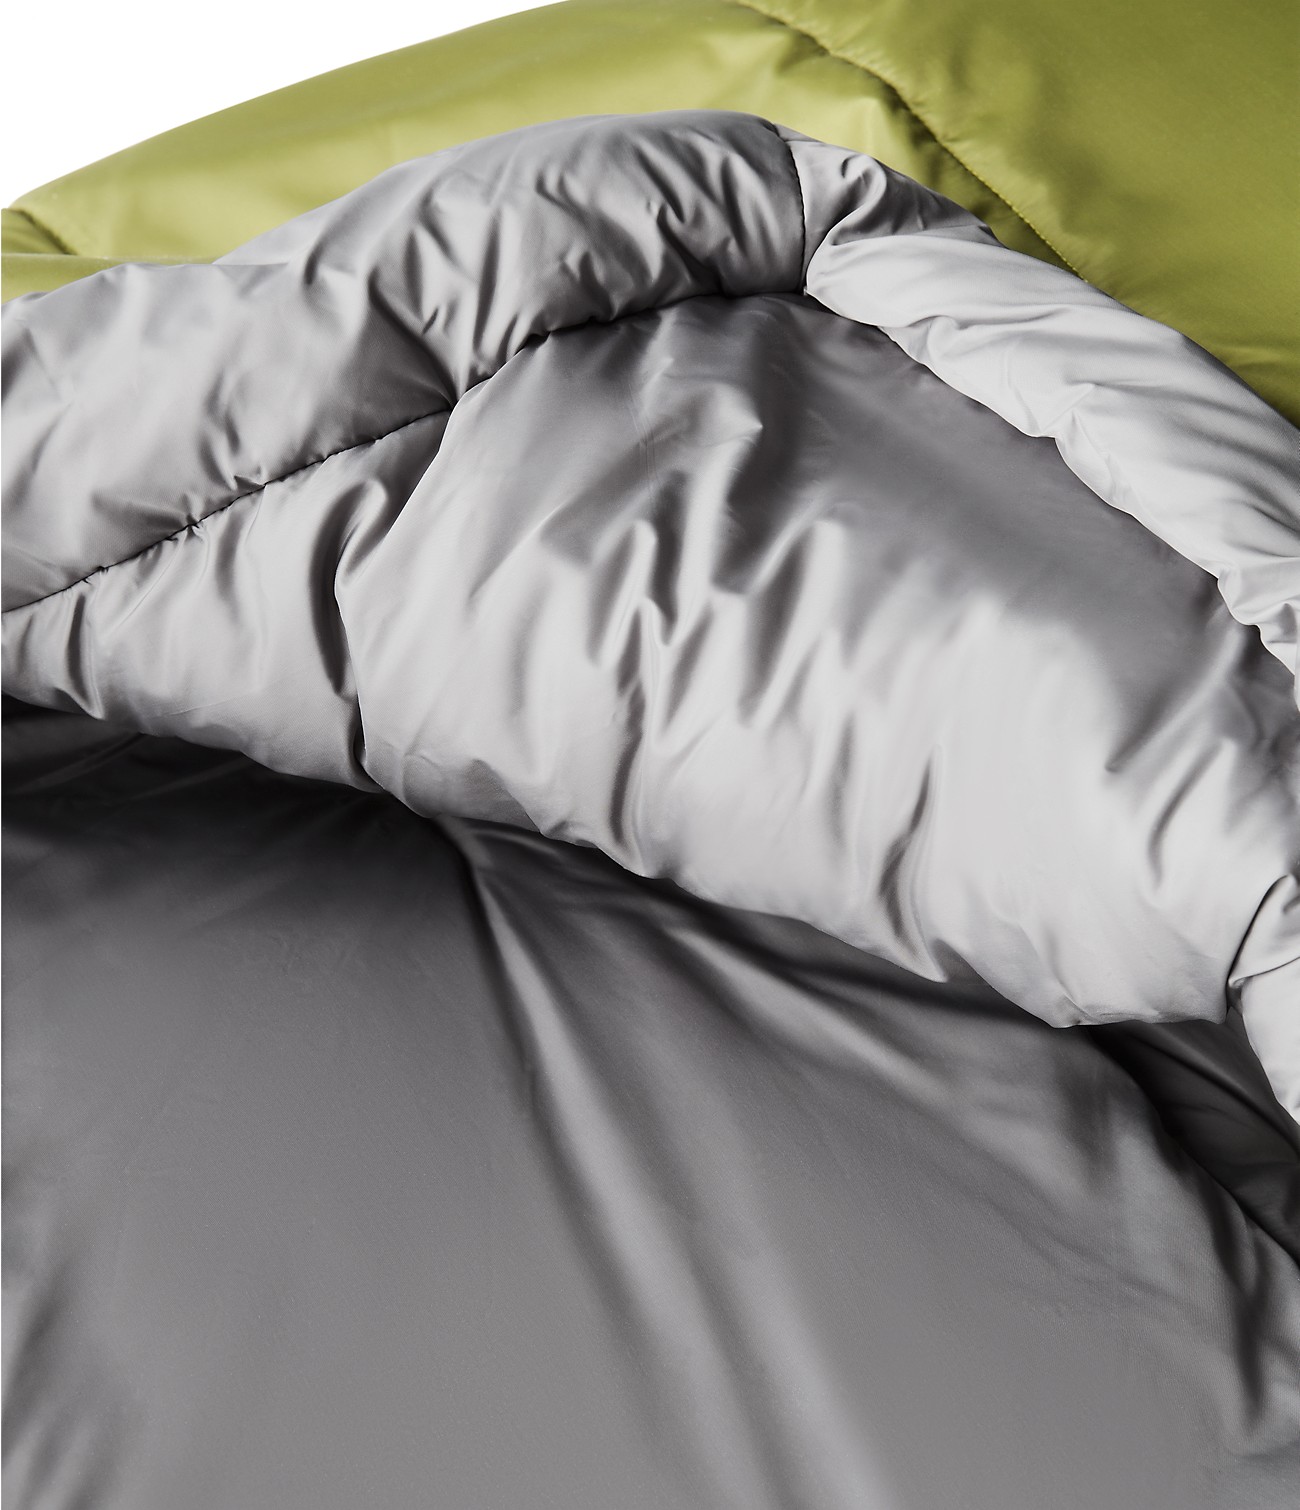 Wasatch 0/-18 Sleeping Bag | The North Face